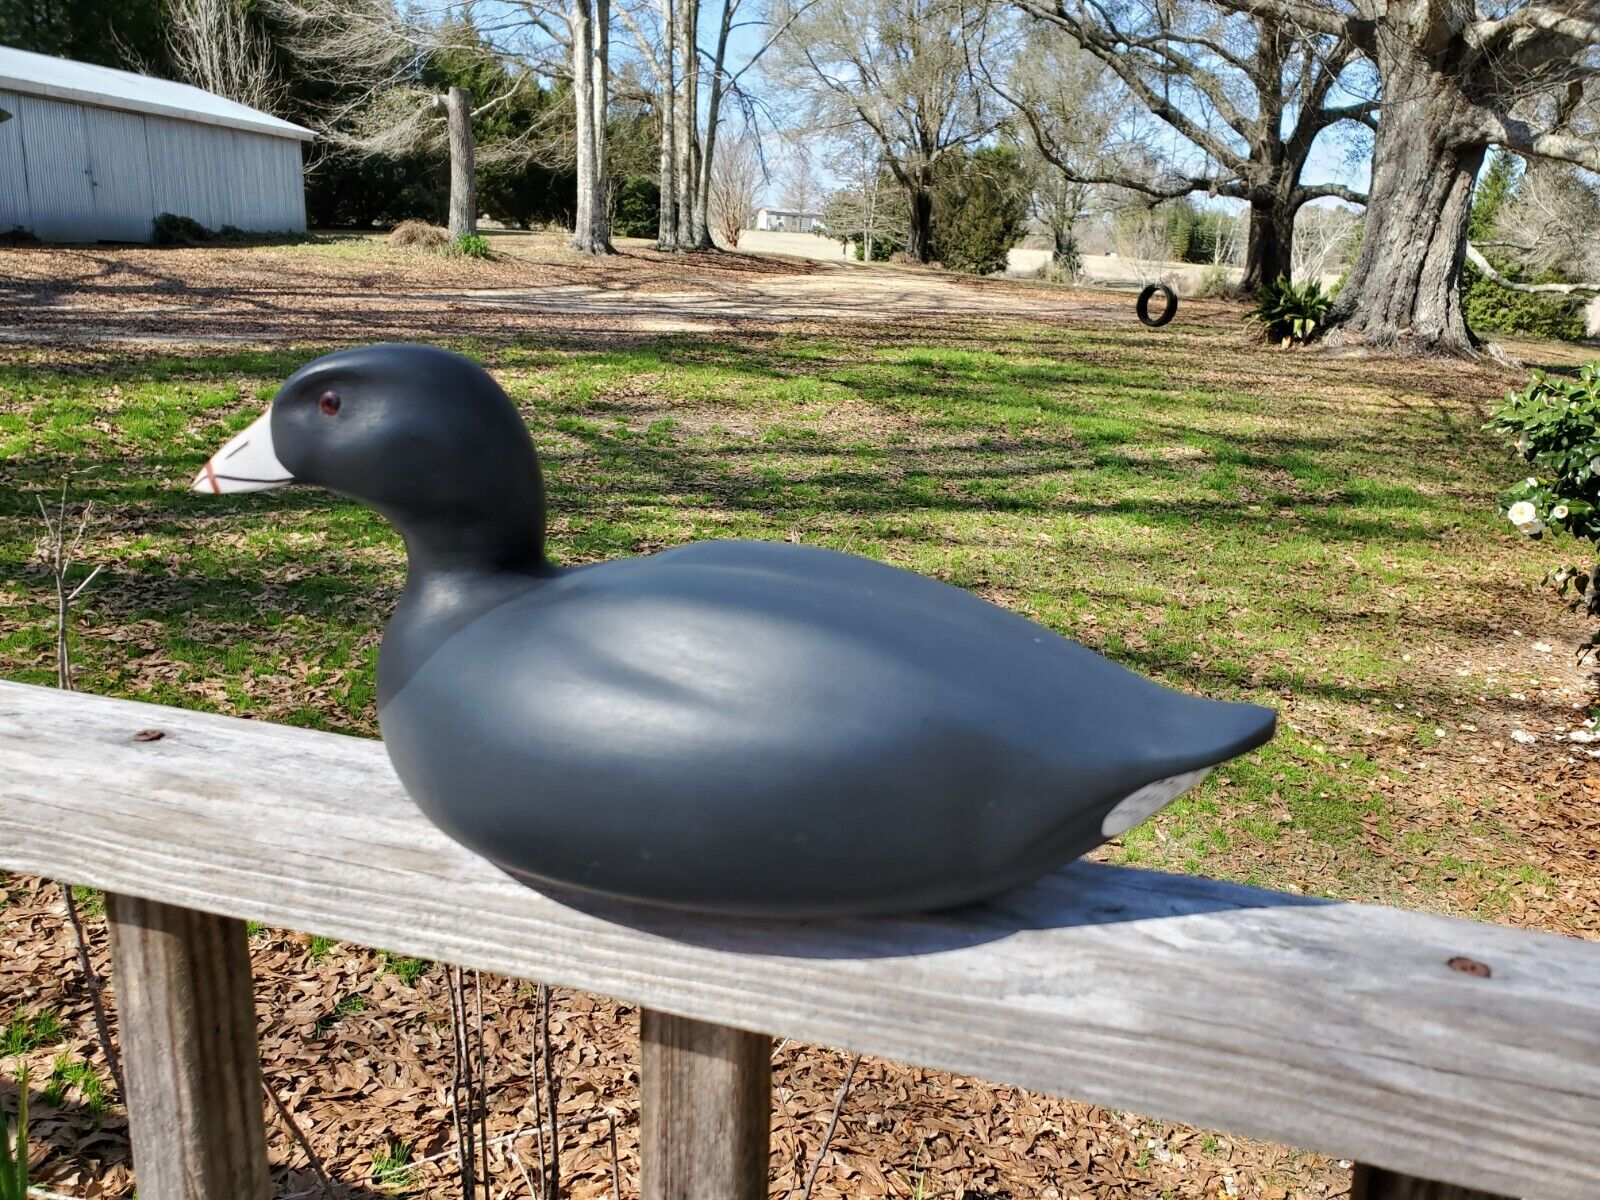 American Coot carved and painted by Lane Brigham of Thibodaux, Louisiana